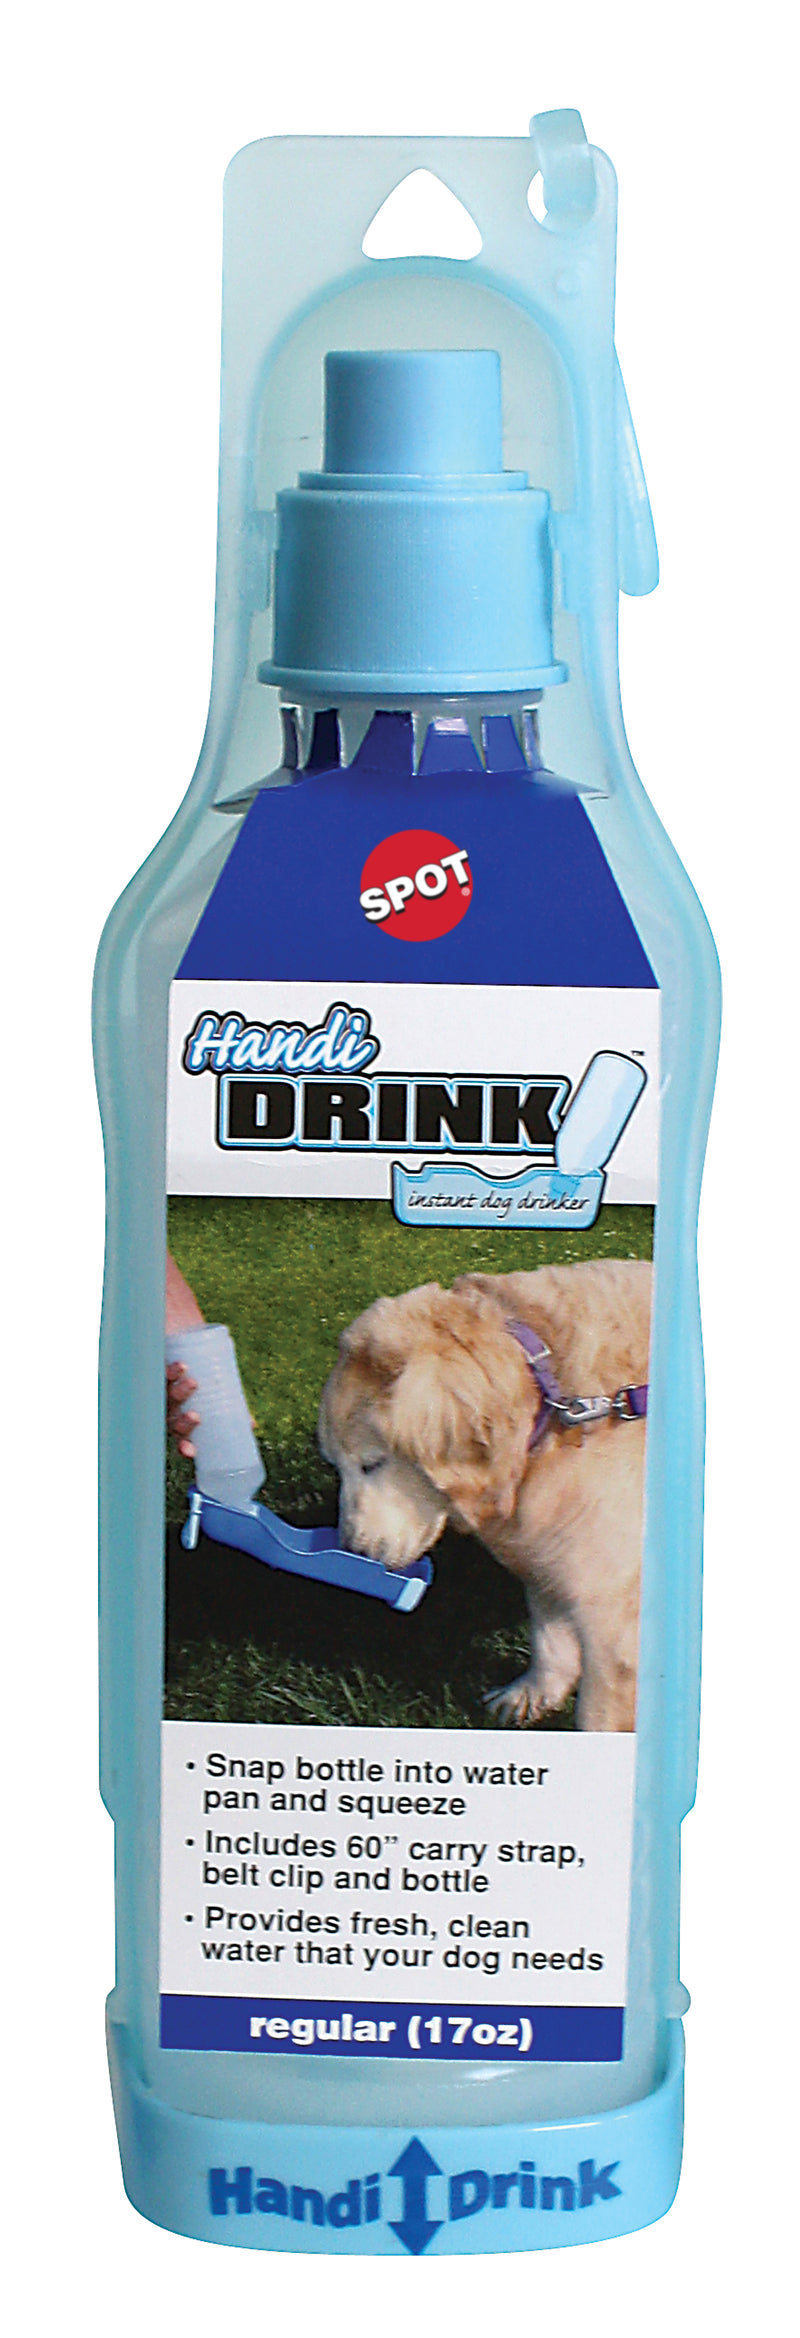 Ethical Products SPOT Handi-Drink2 17oz Regular Size